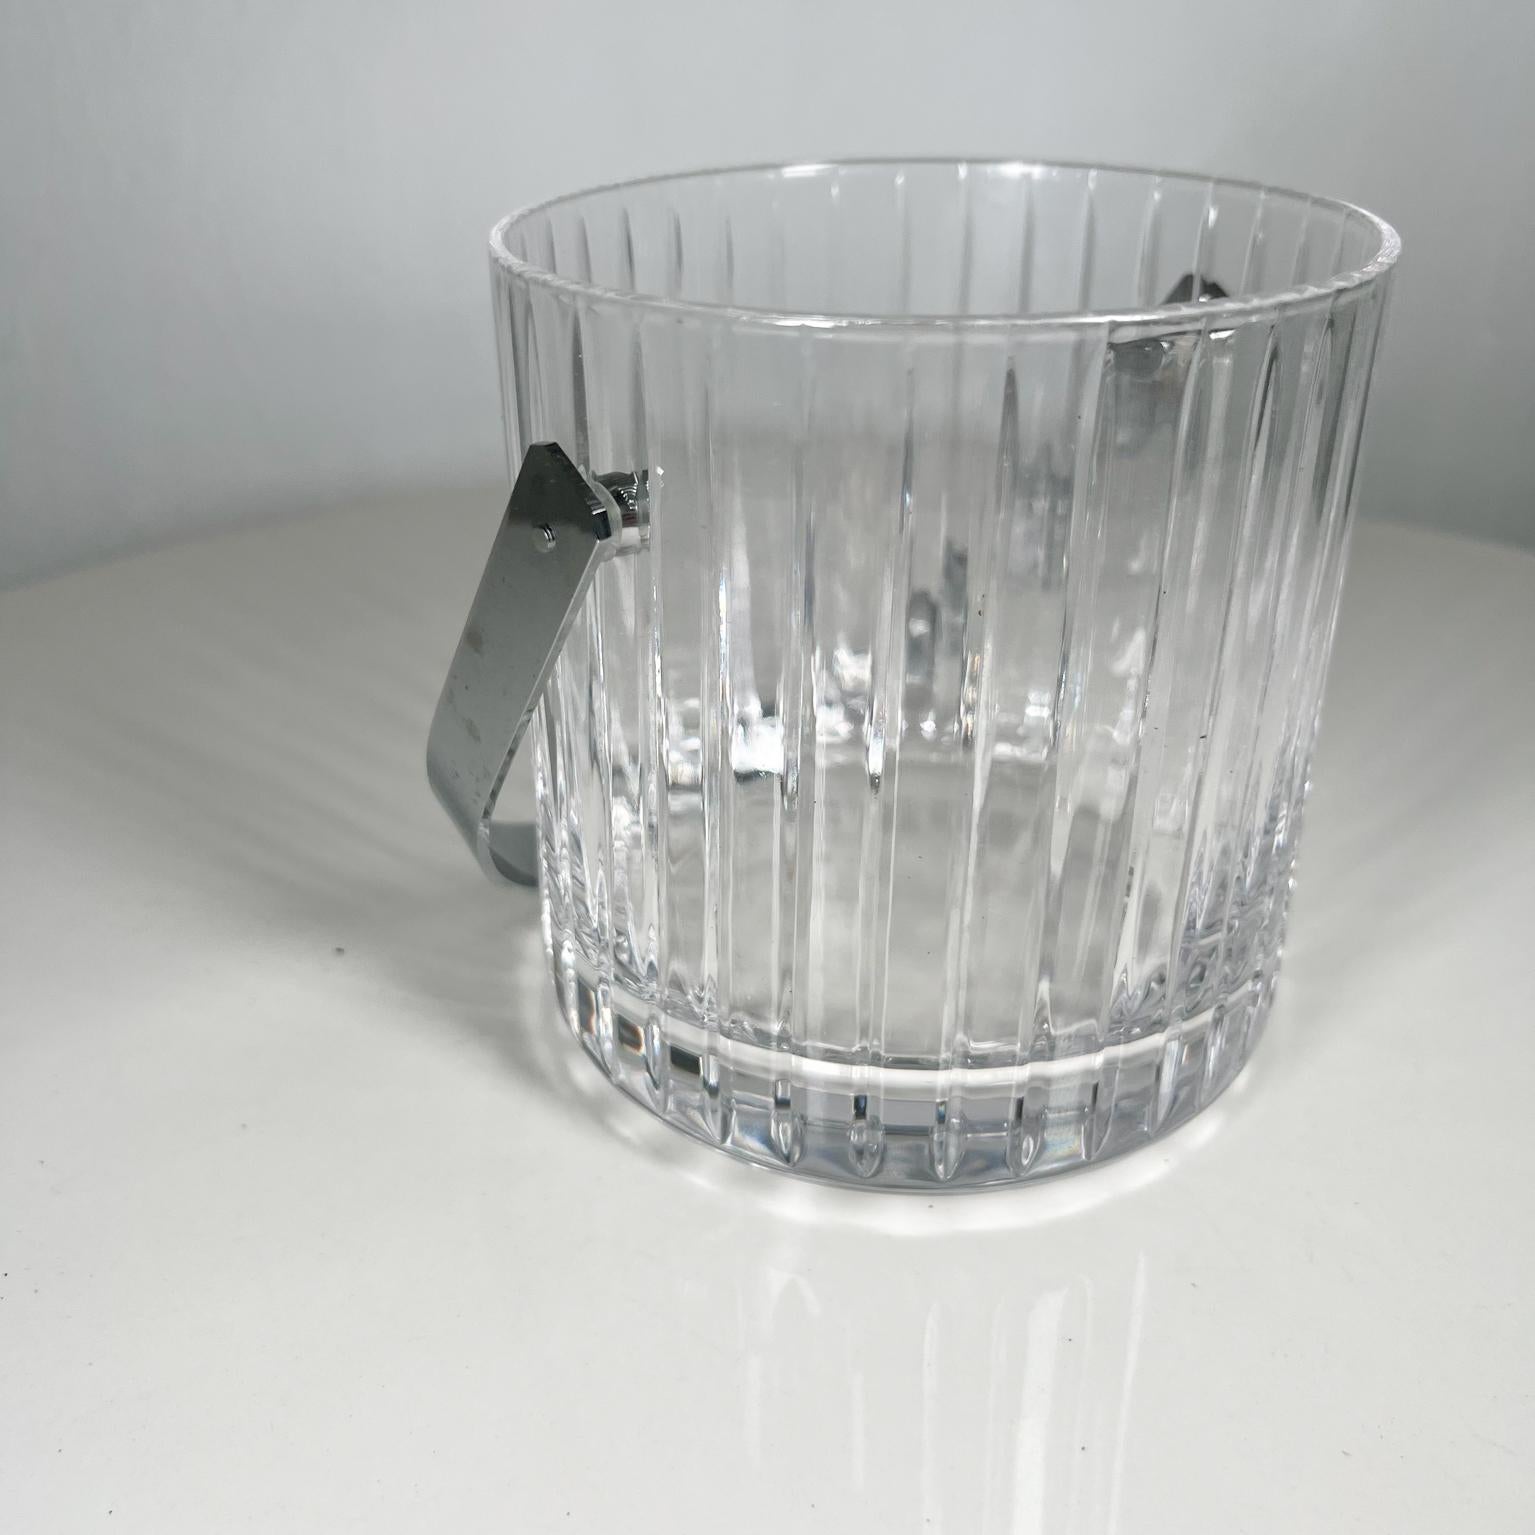 1960s Modernist Ribbed Crystal Glass Ice Bucket from Italy For Sale 1